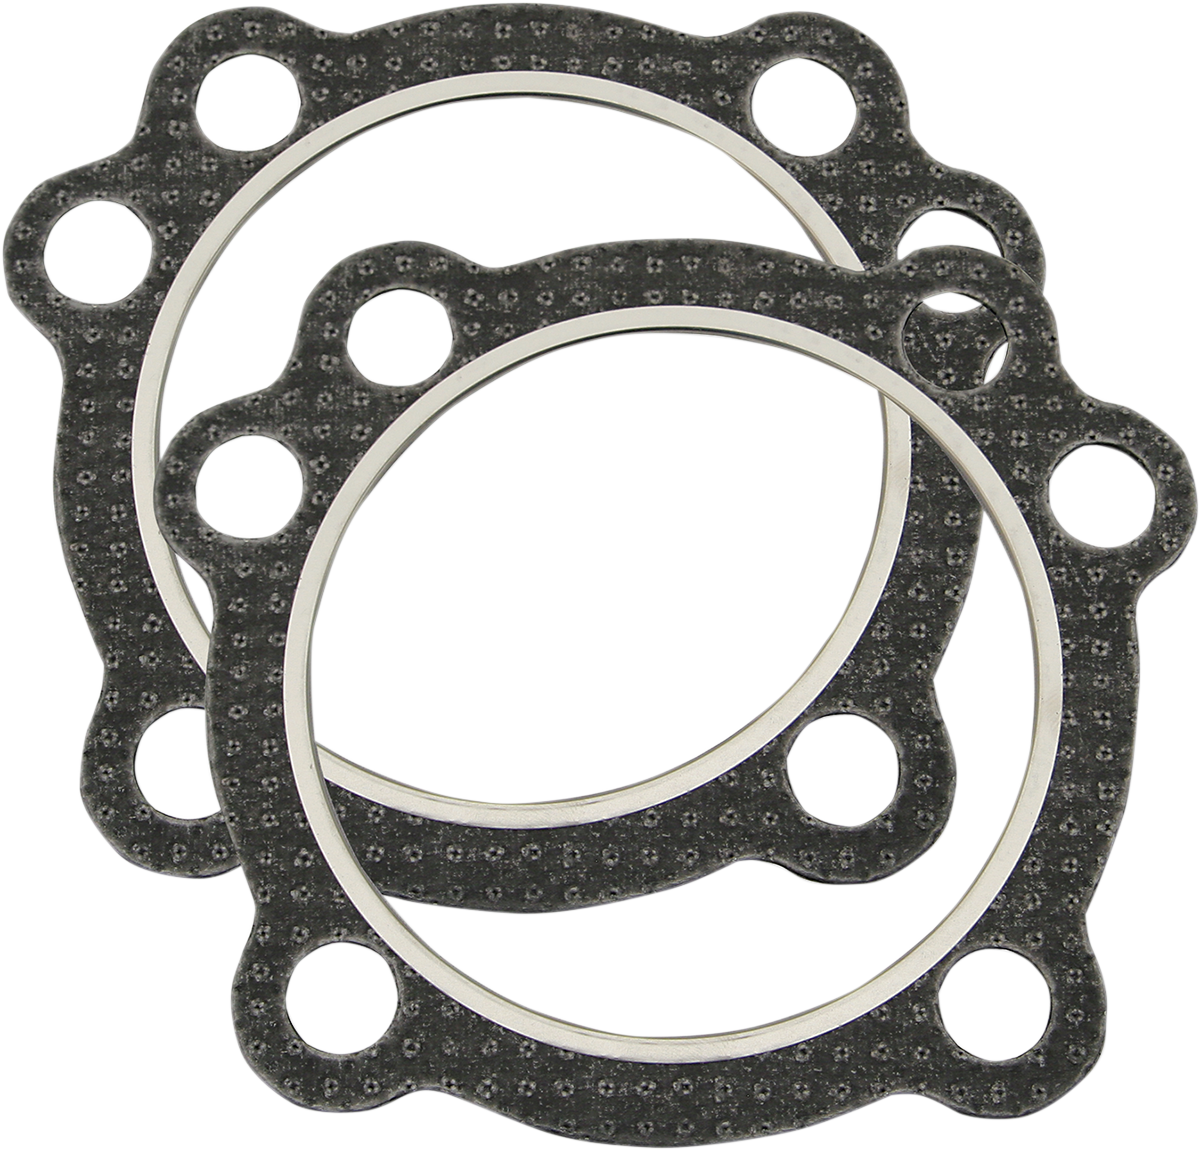 S&S Cycle .045" Motorcycle Head Gaskets 1984-2000 Harley Touring Softail Dyna